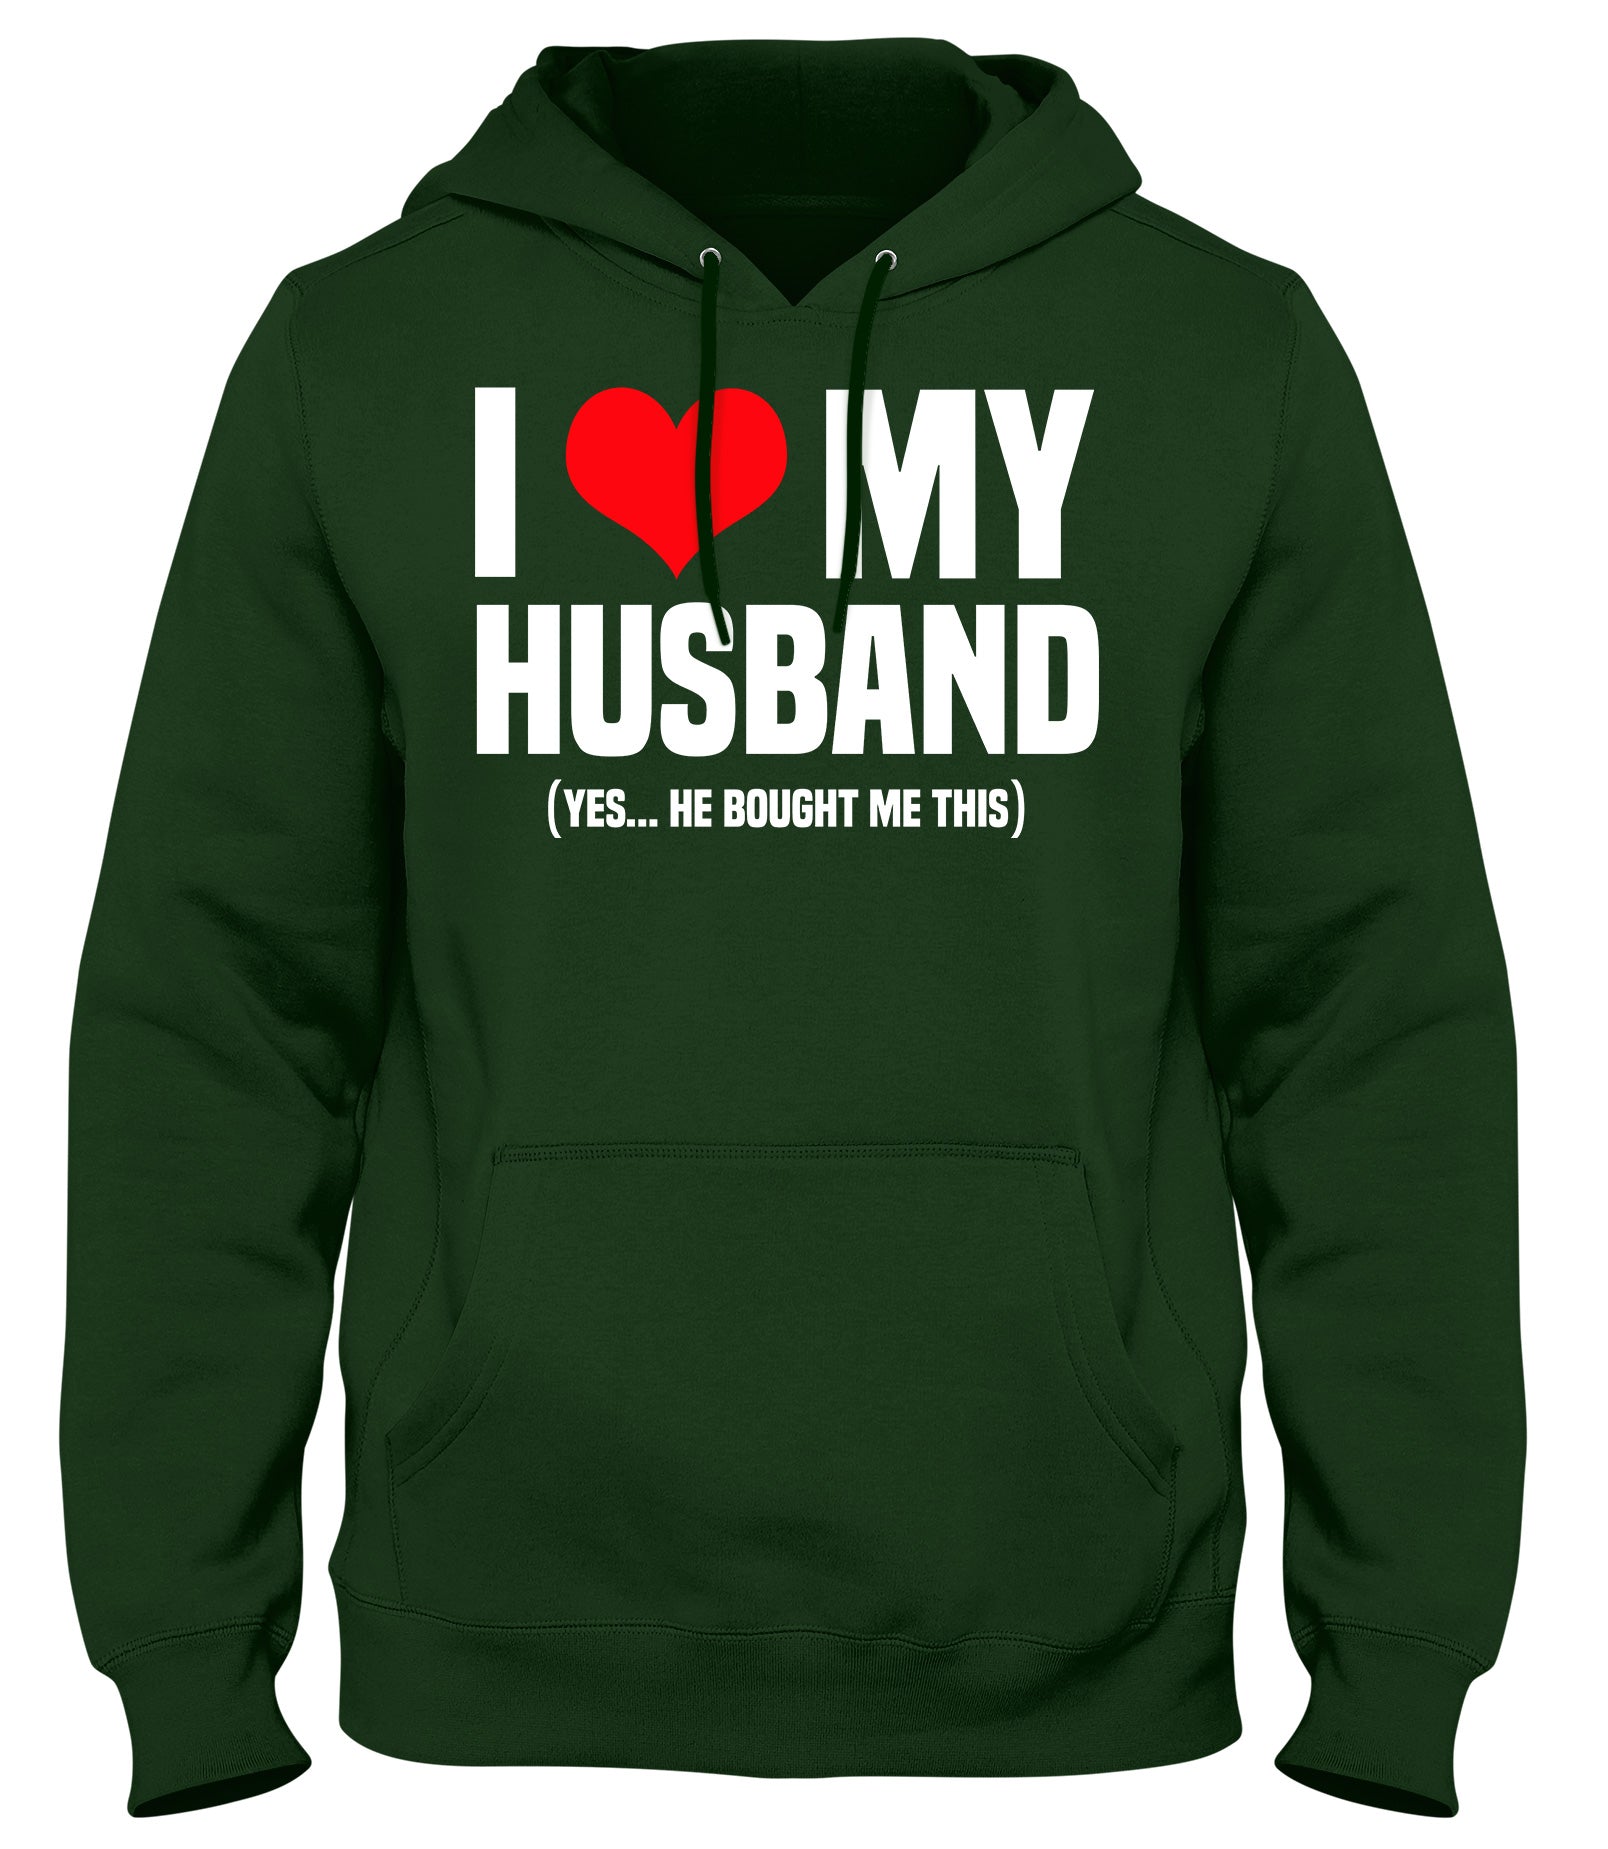 I LOVE MY HUSBAND (YES HE BOUGHT ME THIS)  MENS WOMENS LADIES UNISEX FUNNY SLOGAN HOODIE